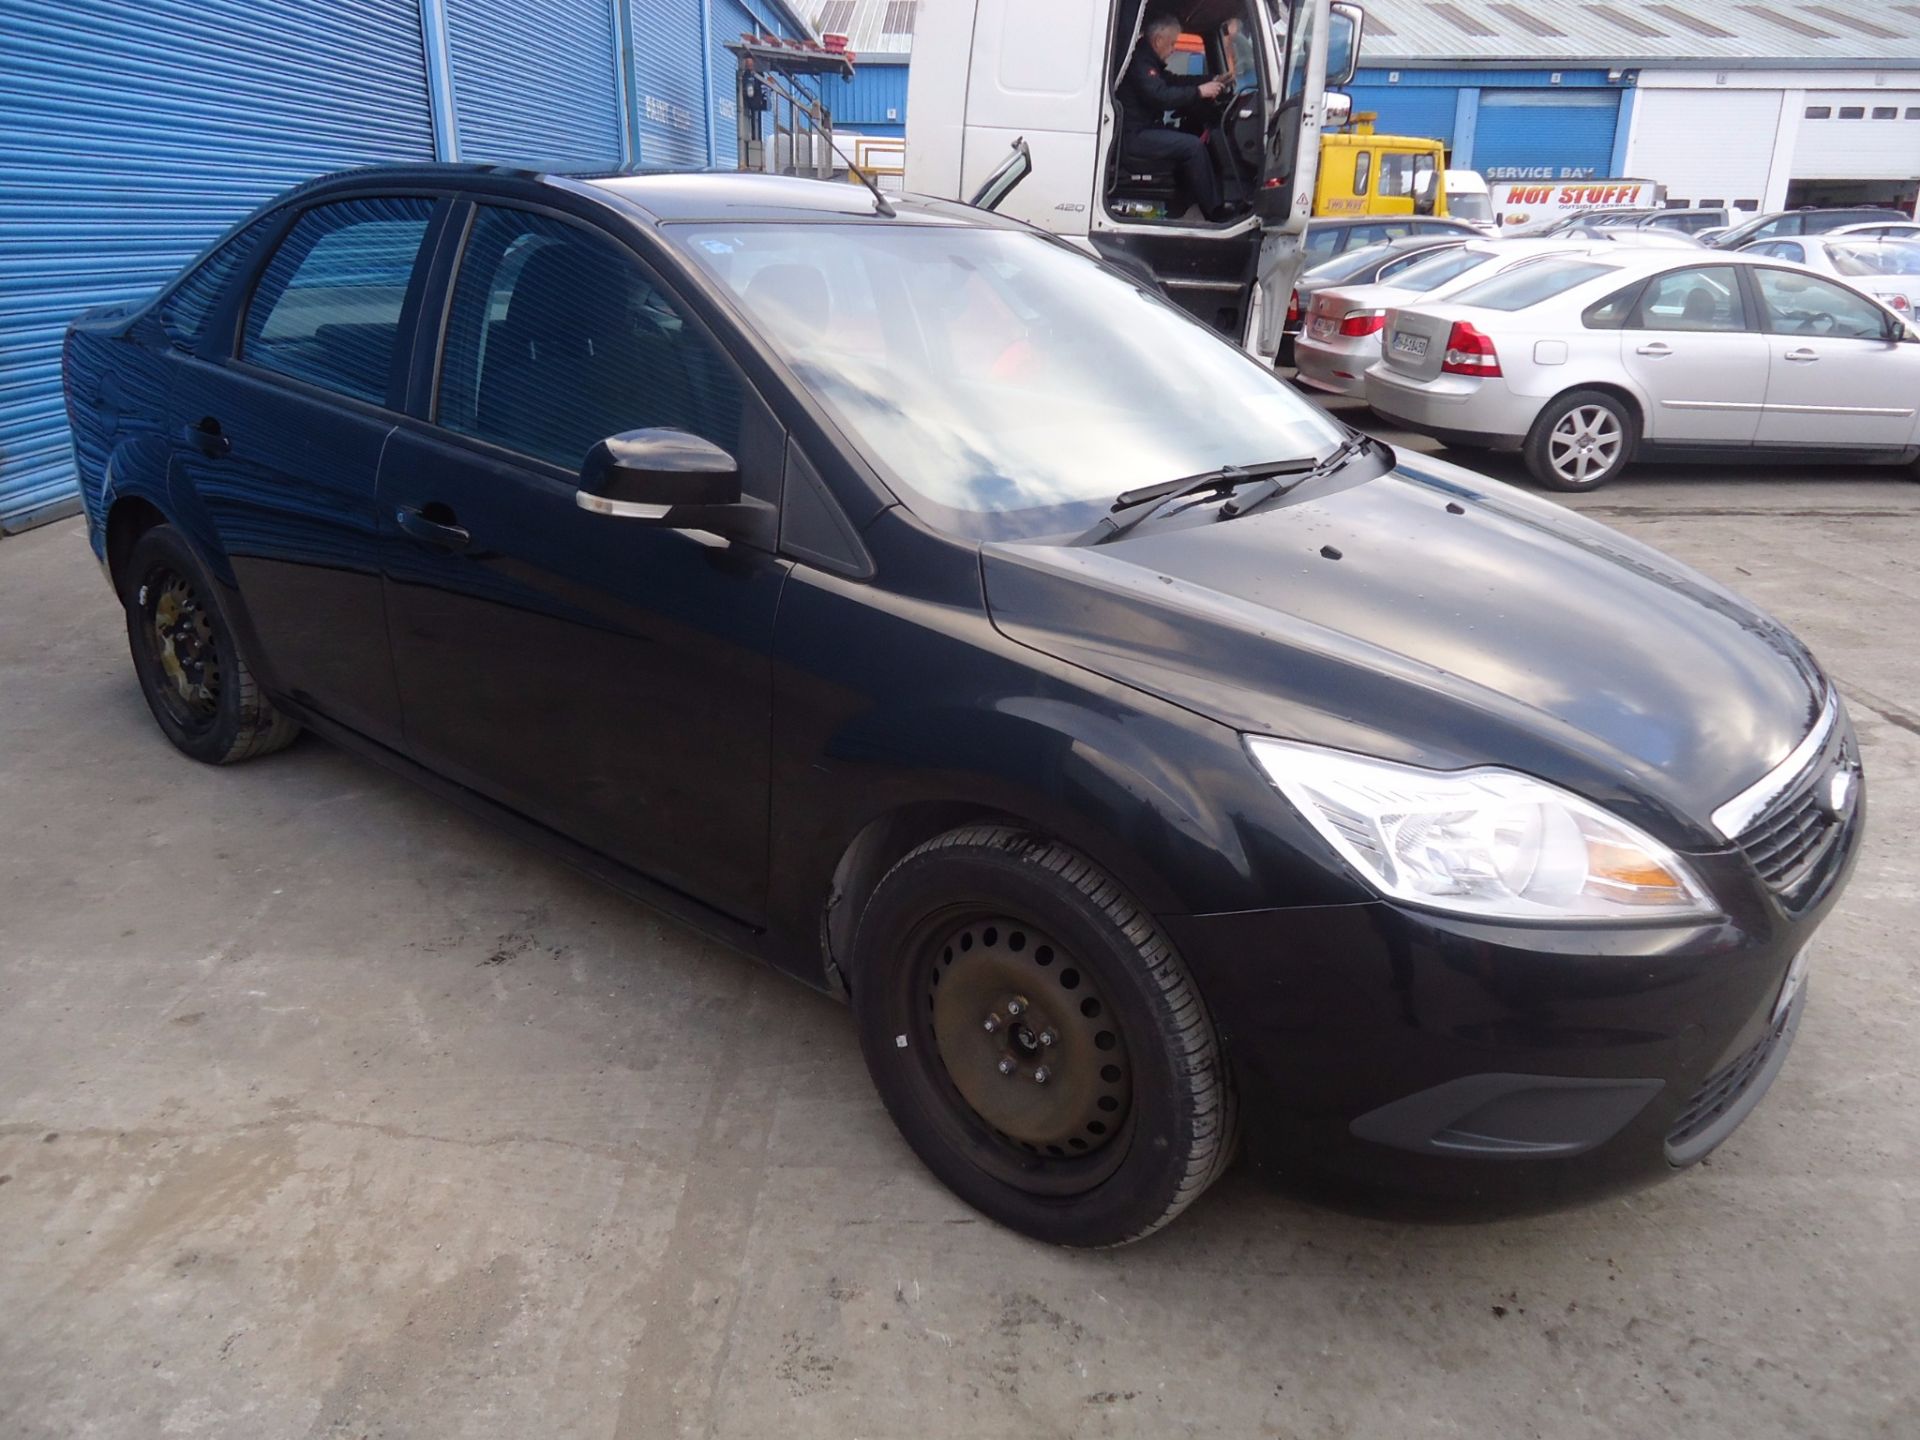 08D59105 Ford Focus - Image 2 of 6